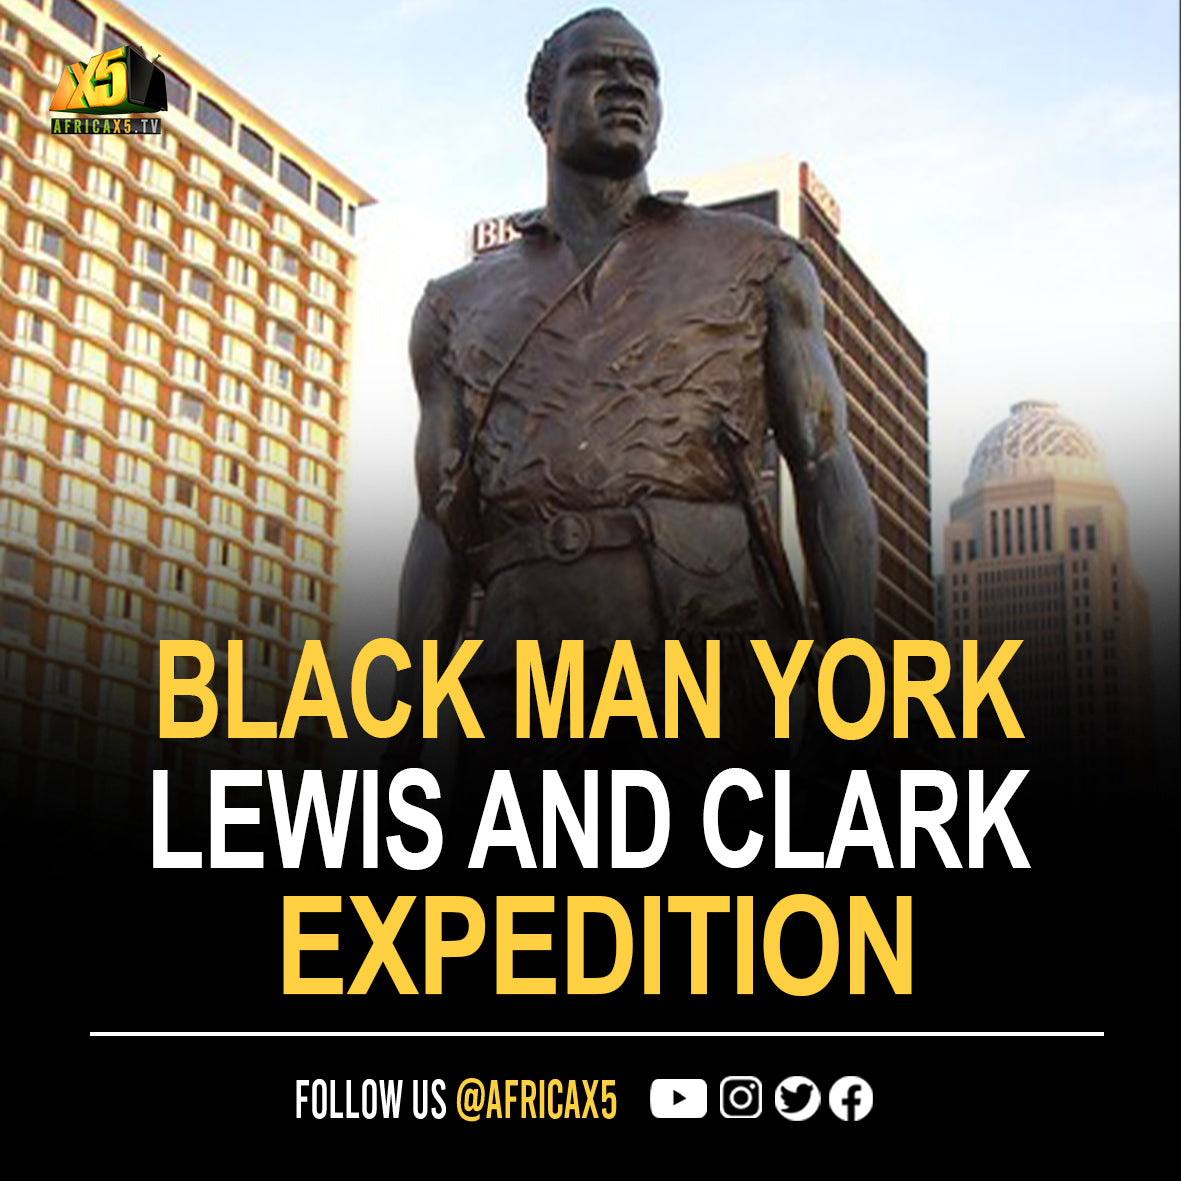 Everyone knows Lewis & Clark, but did you know that there was a black man who was also part of the expedition